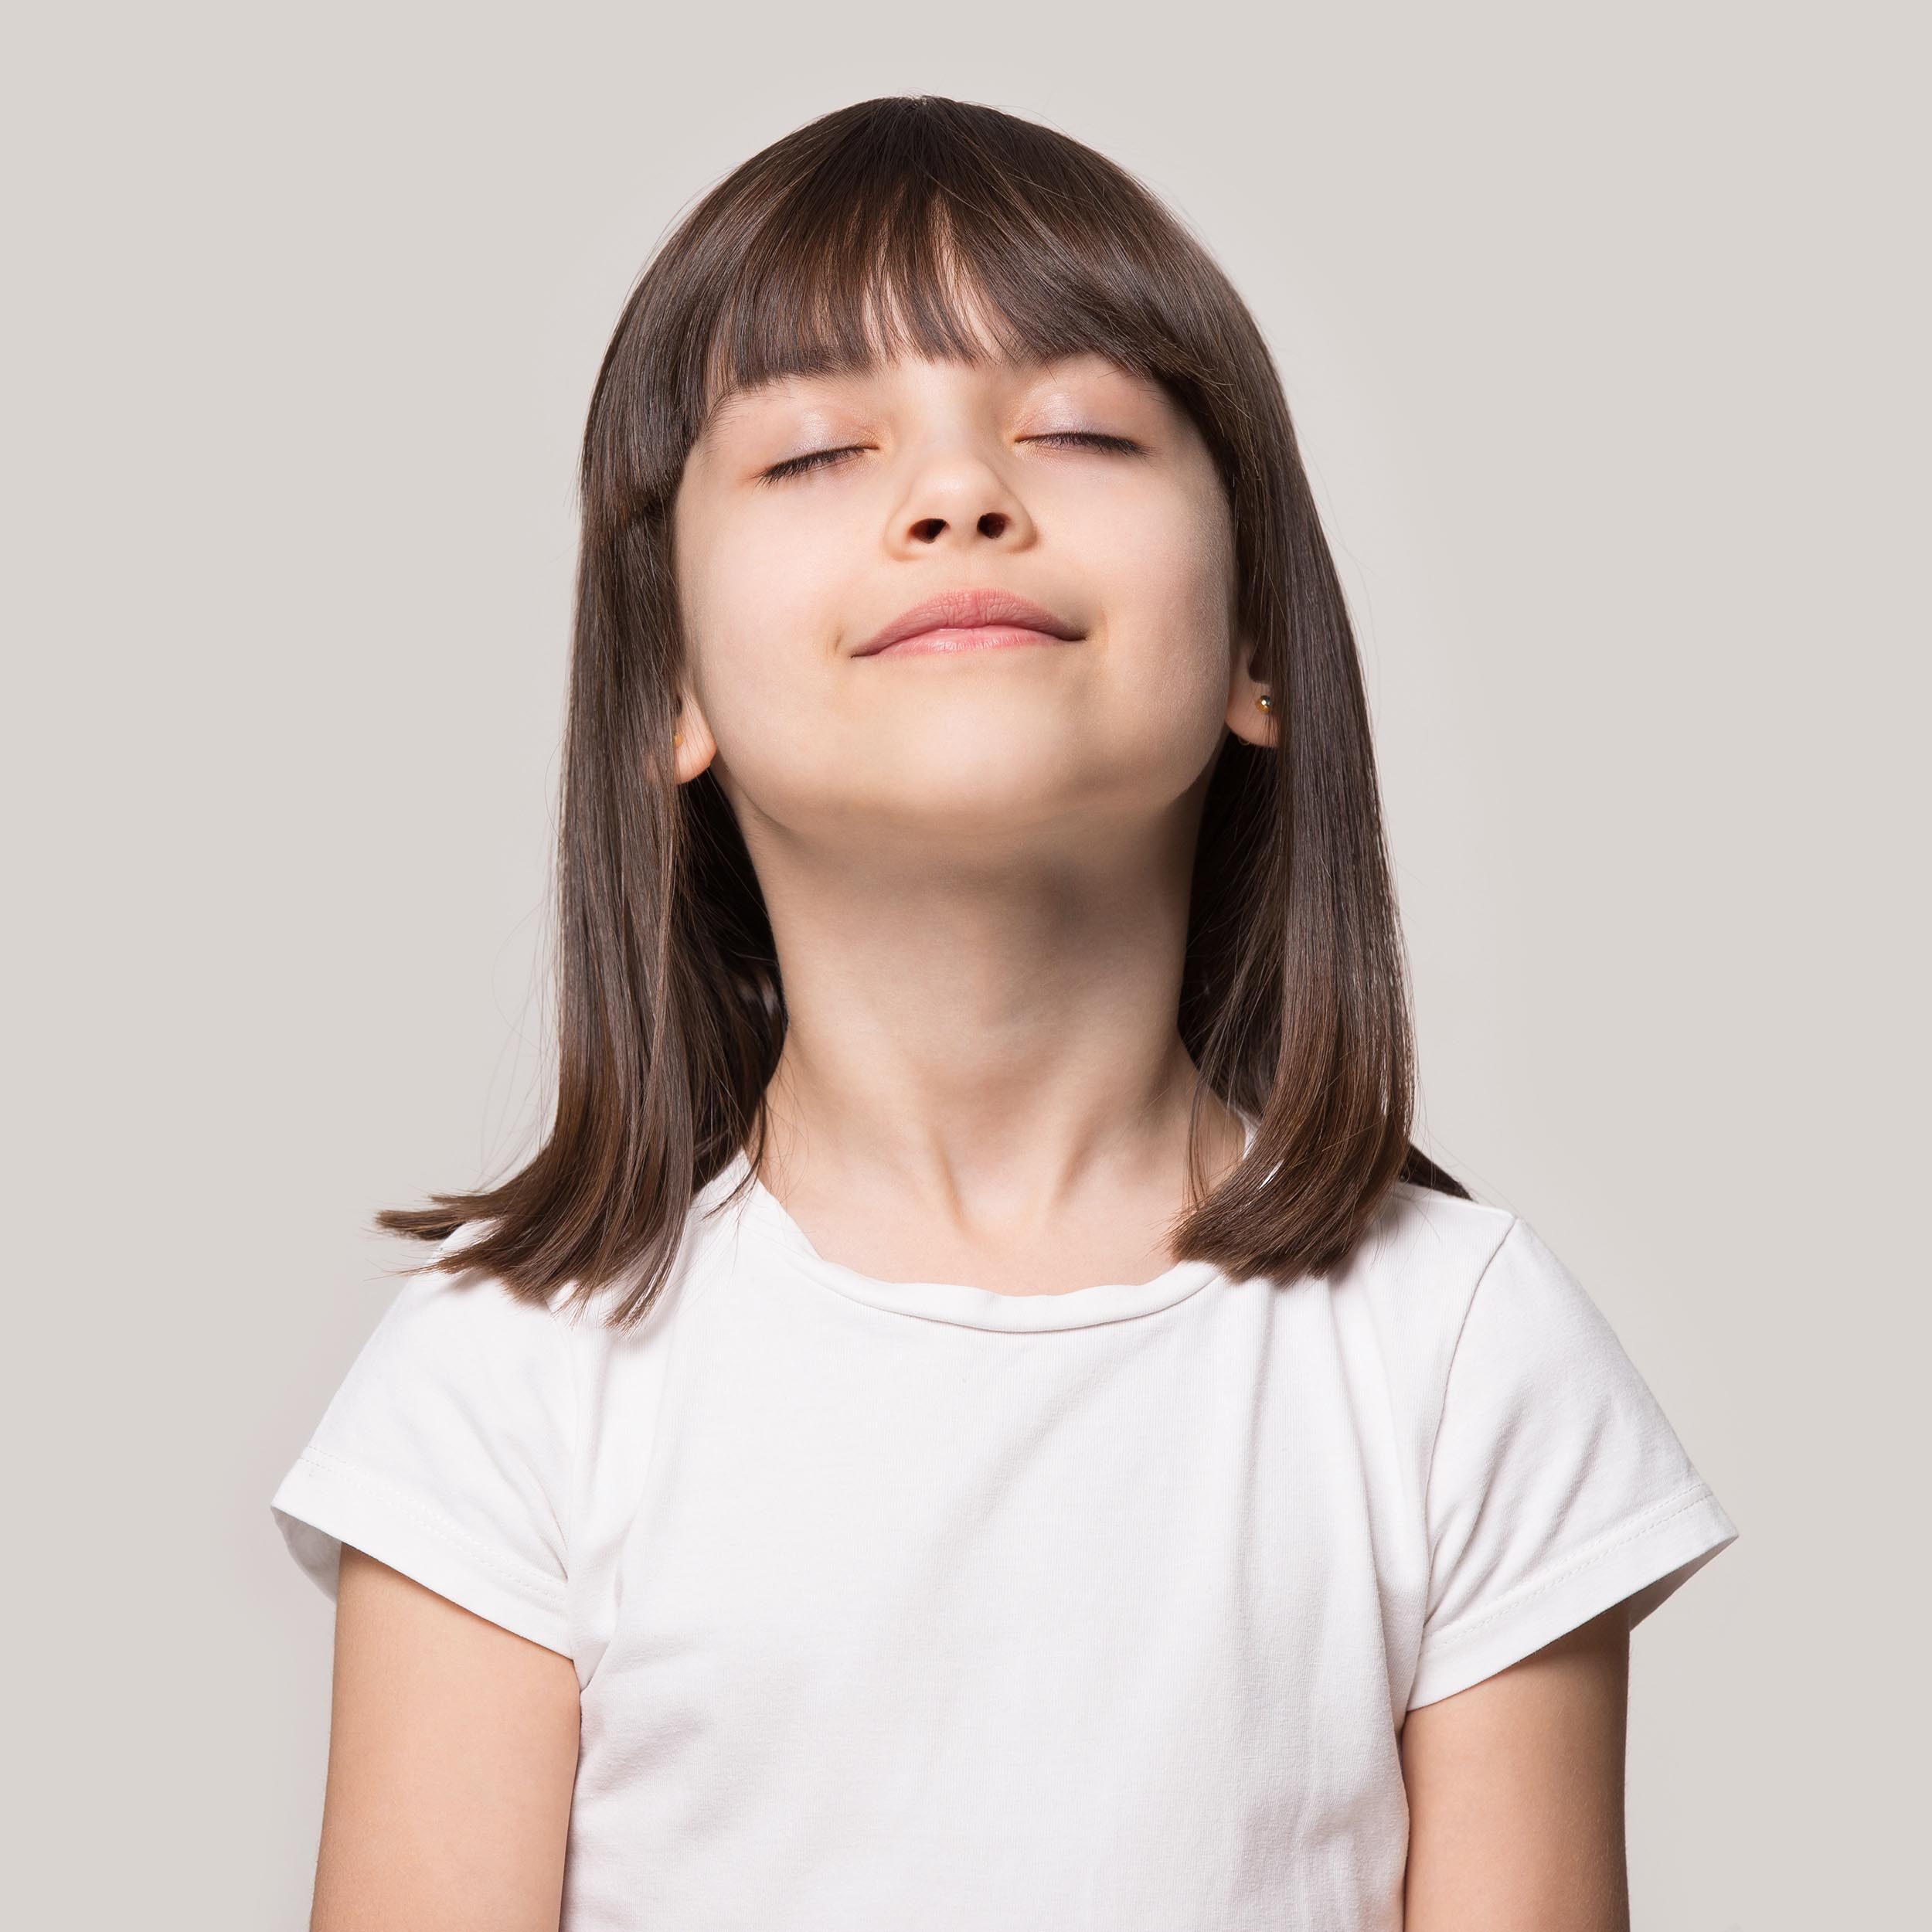 A little girl with closed eyes wearing a white shirt.